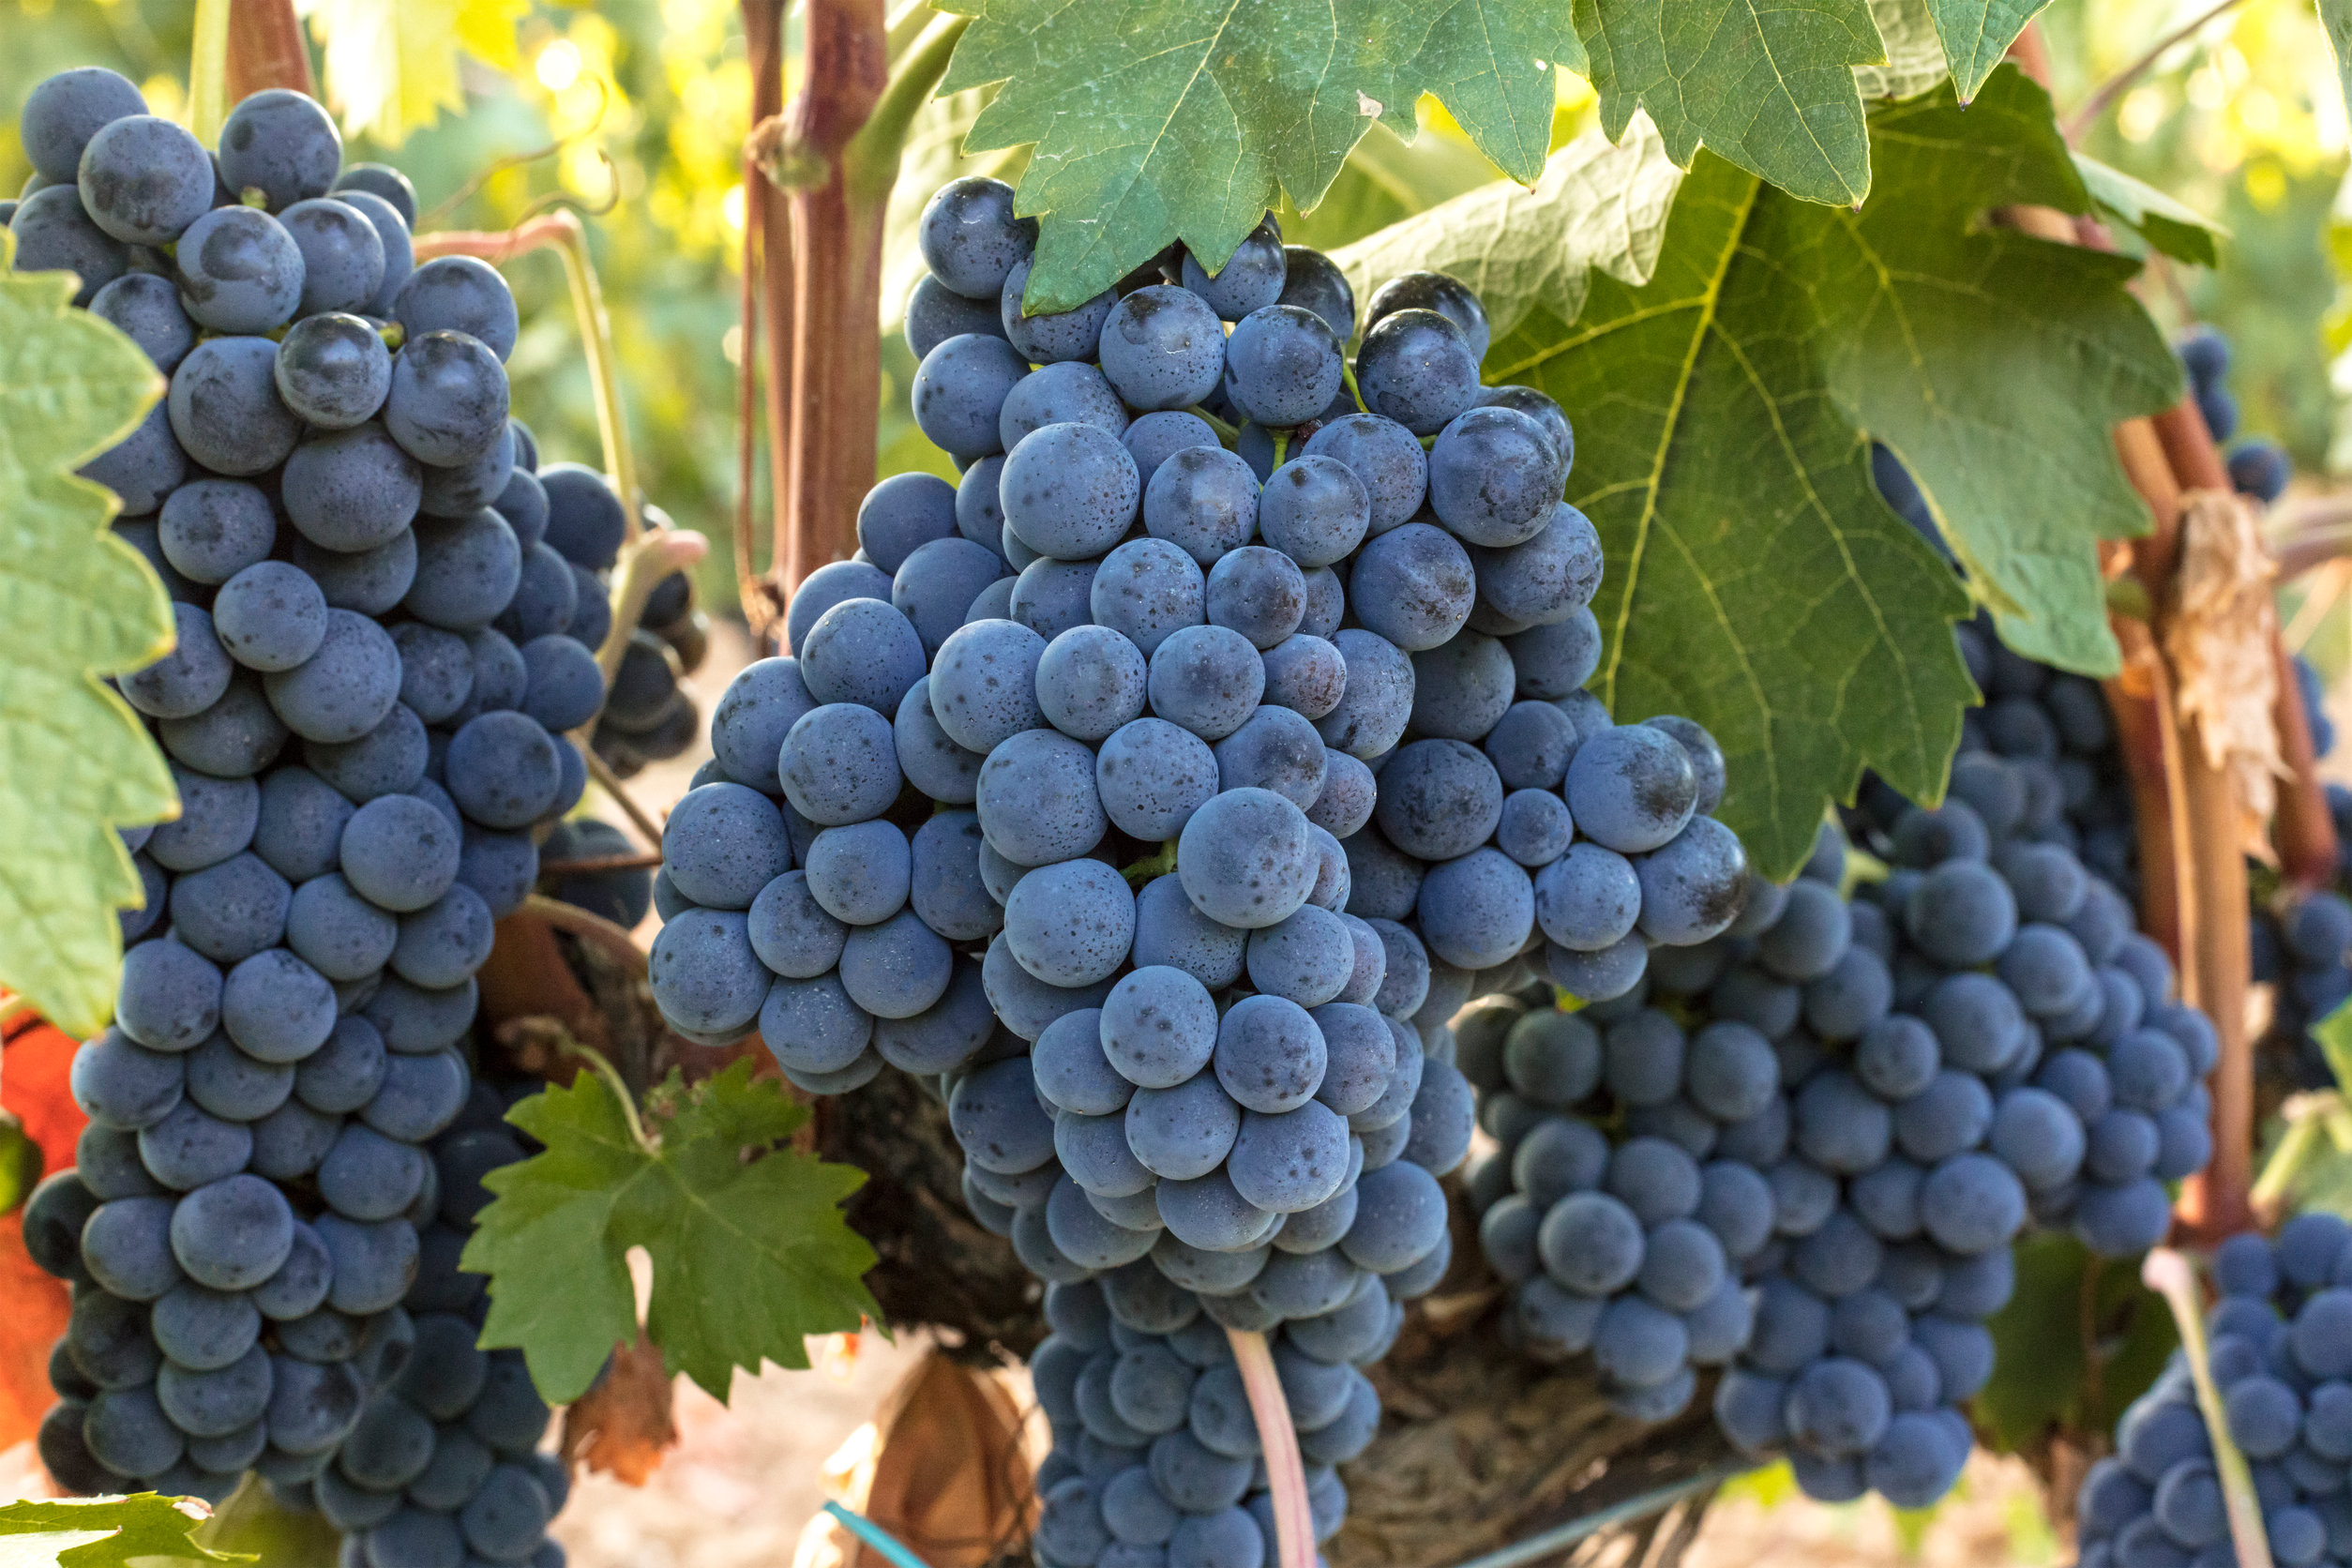 Wine grapes in a vineyard before autumn harvest